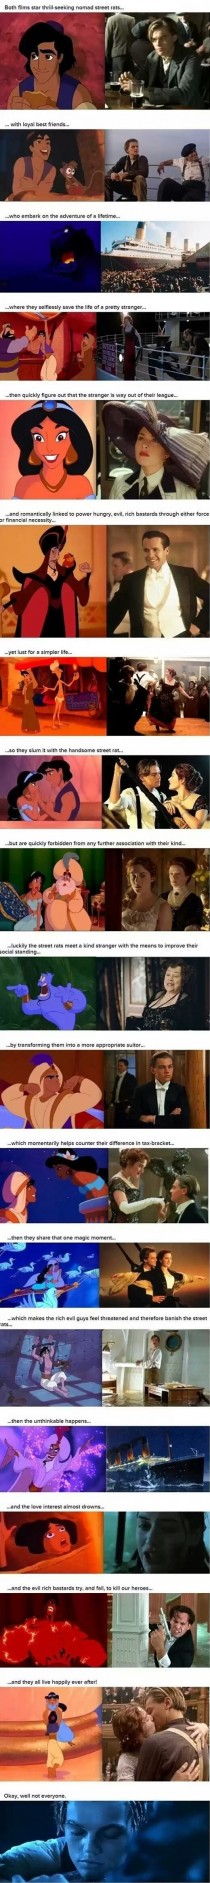 Proof that Aladdin and Titanic are basically the same movie